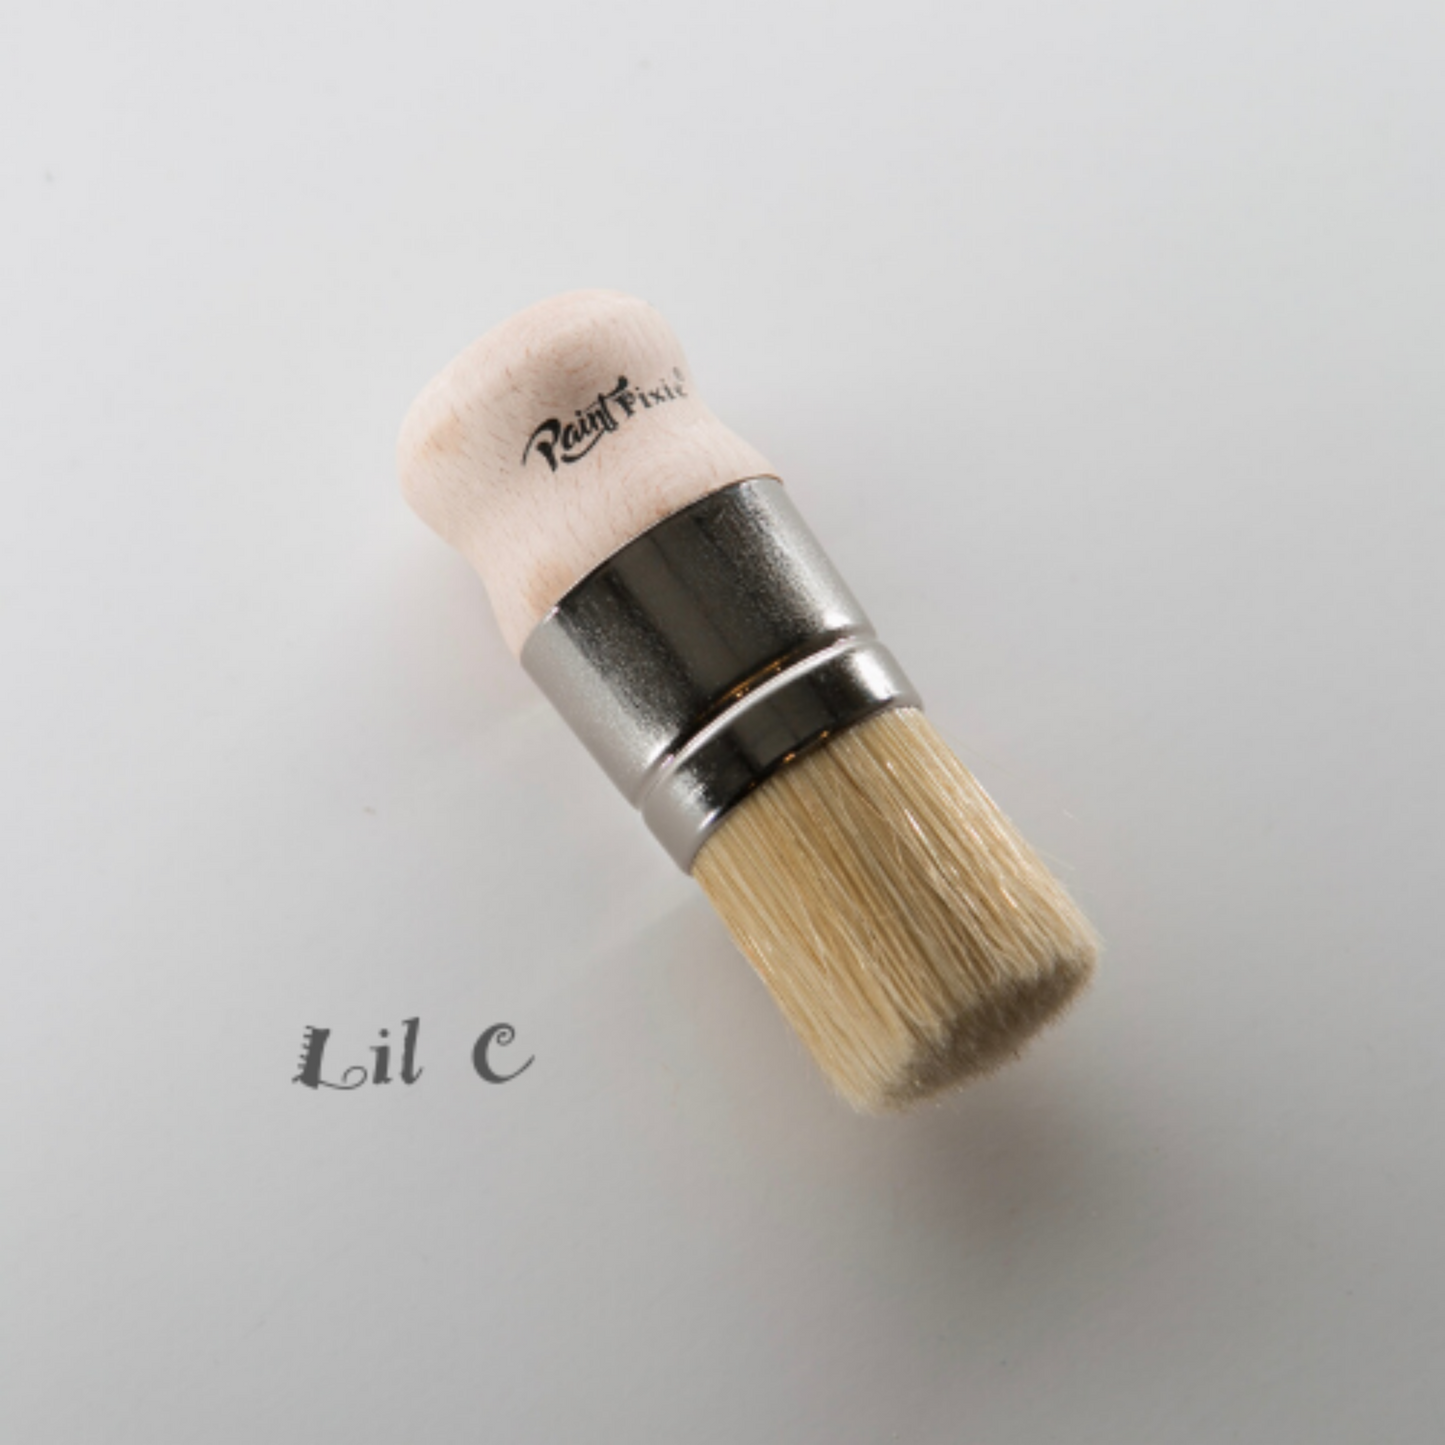 Paint Pixie Brushes "Lil C" Wax Brush available at Milton's Daughter